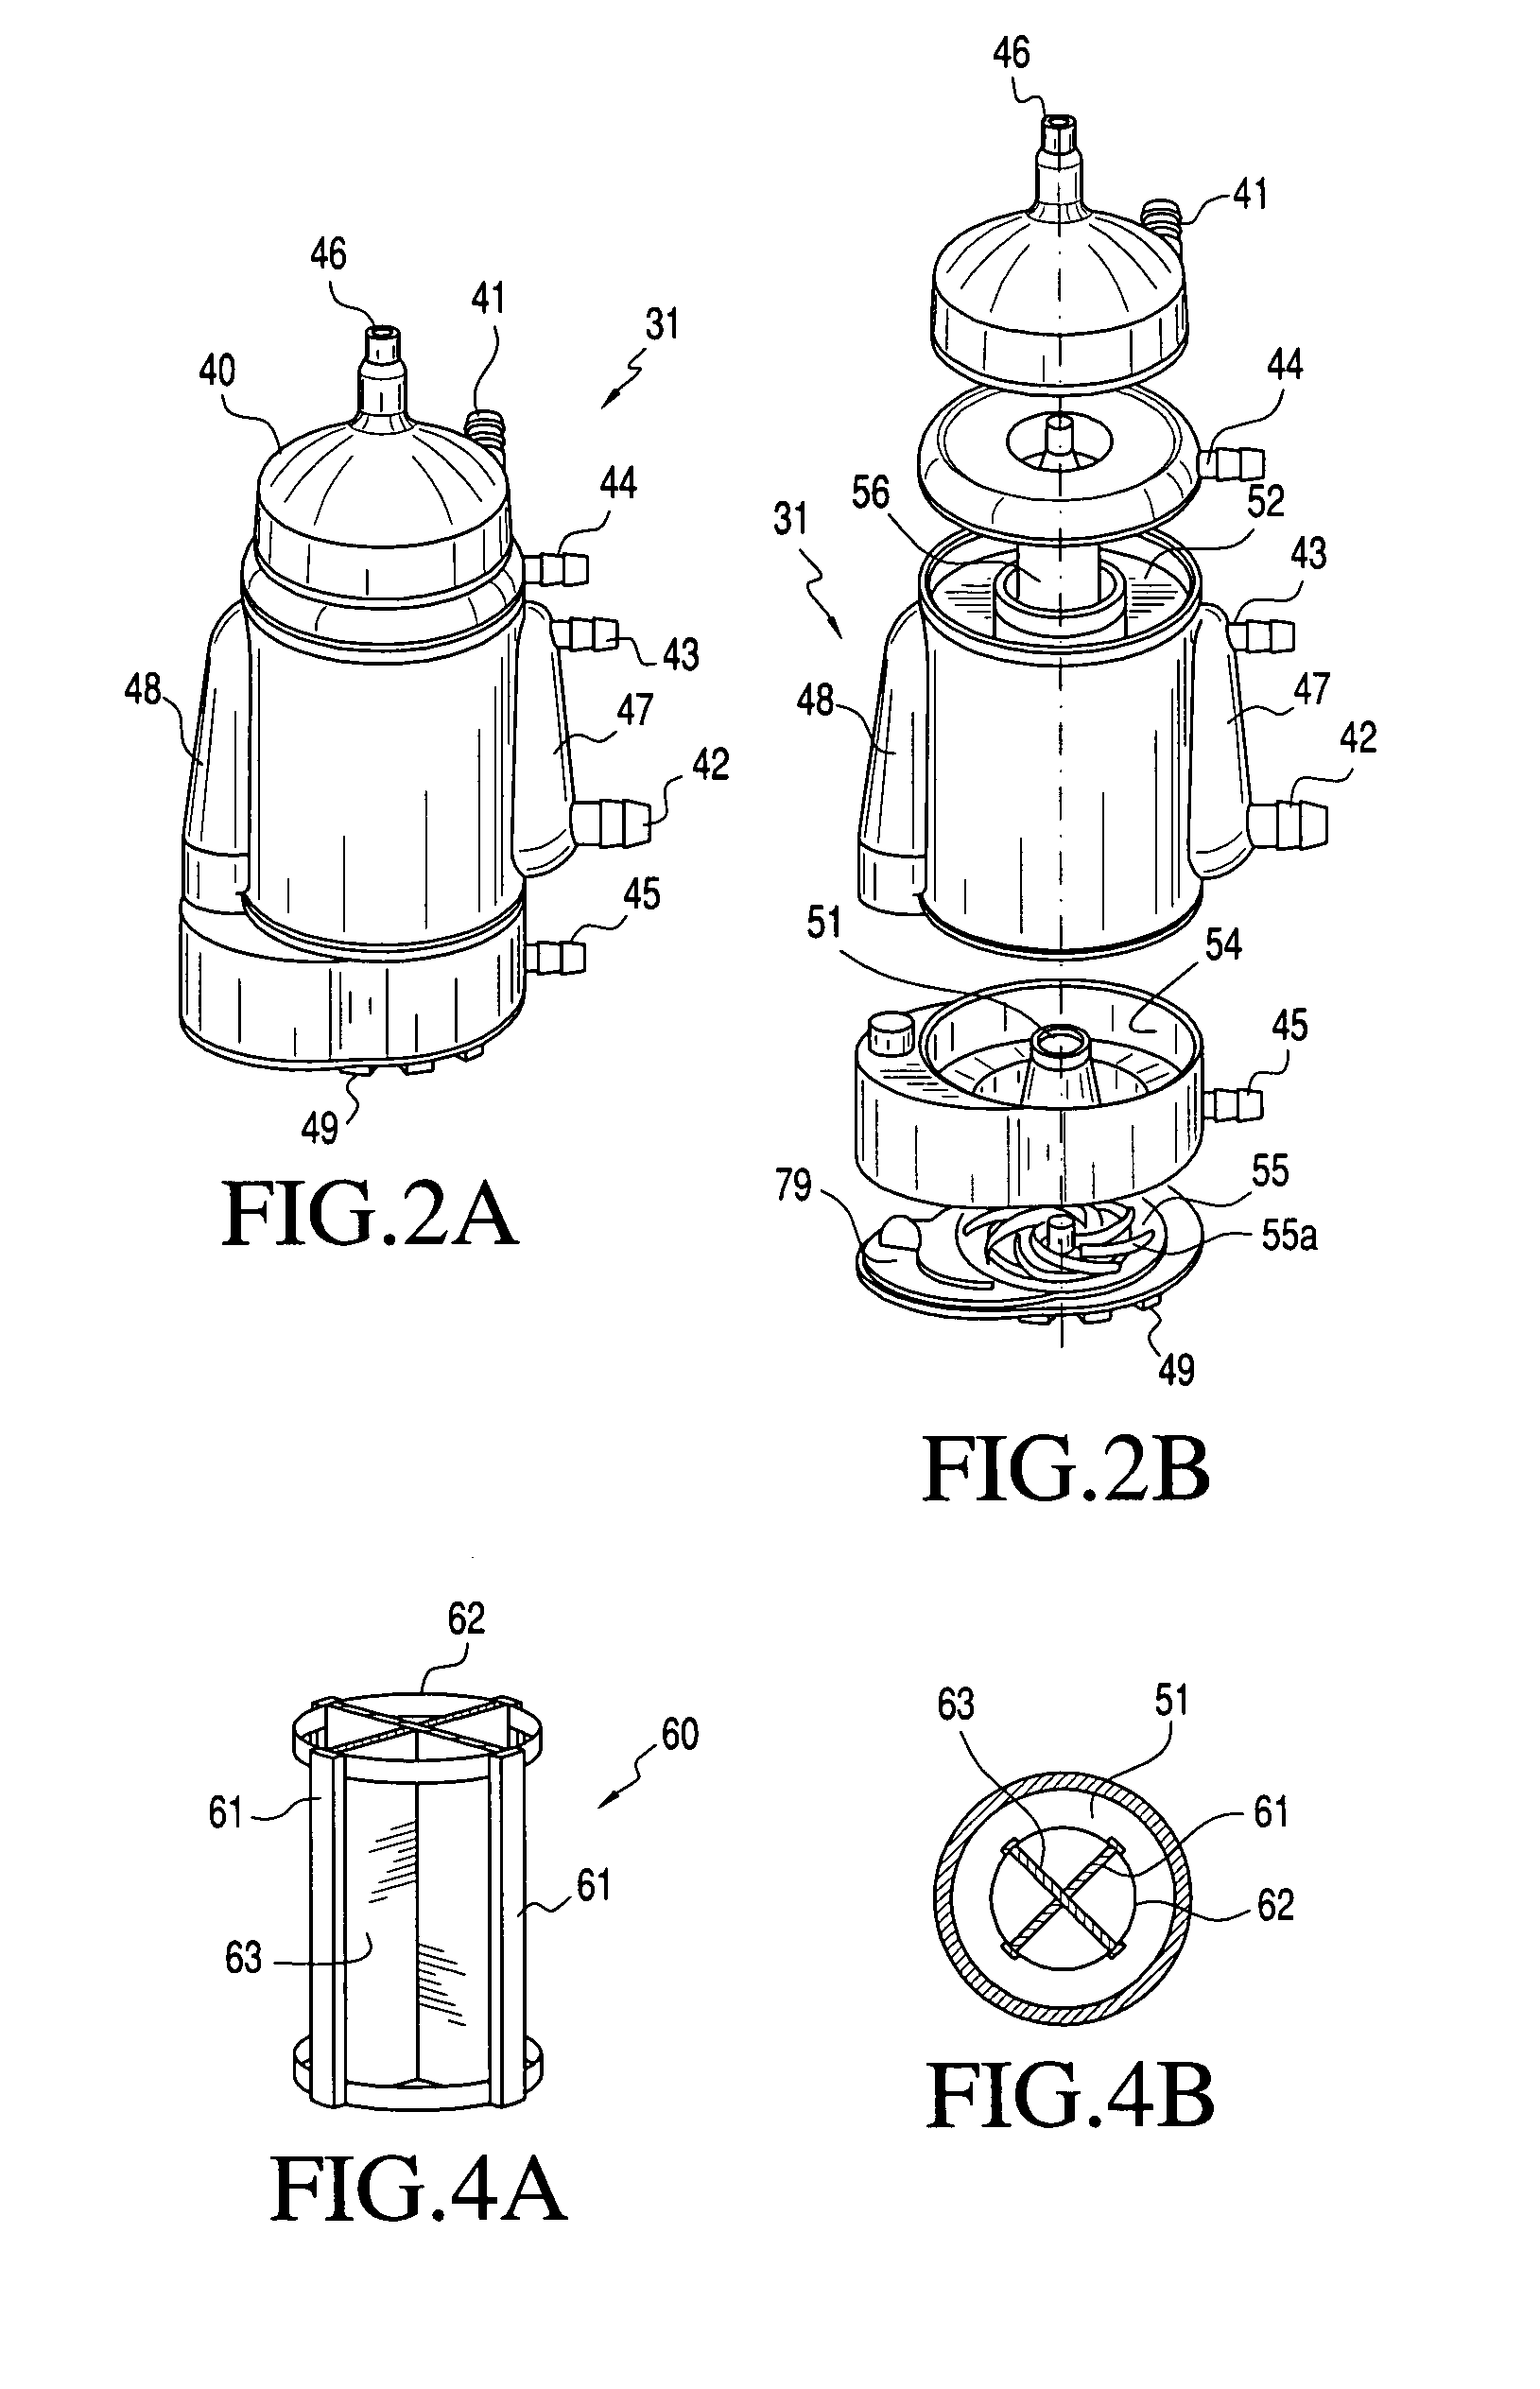 Extracorporeal blood handling system with integrated heat exchanger